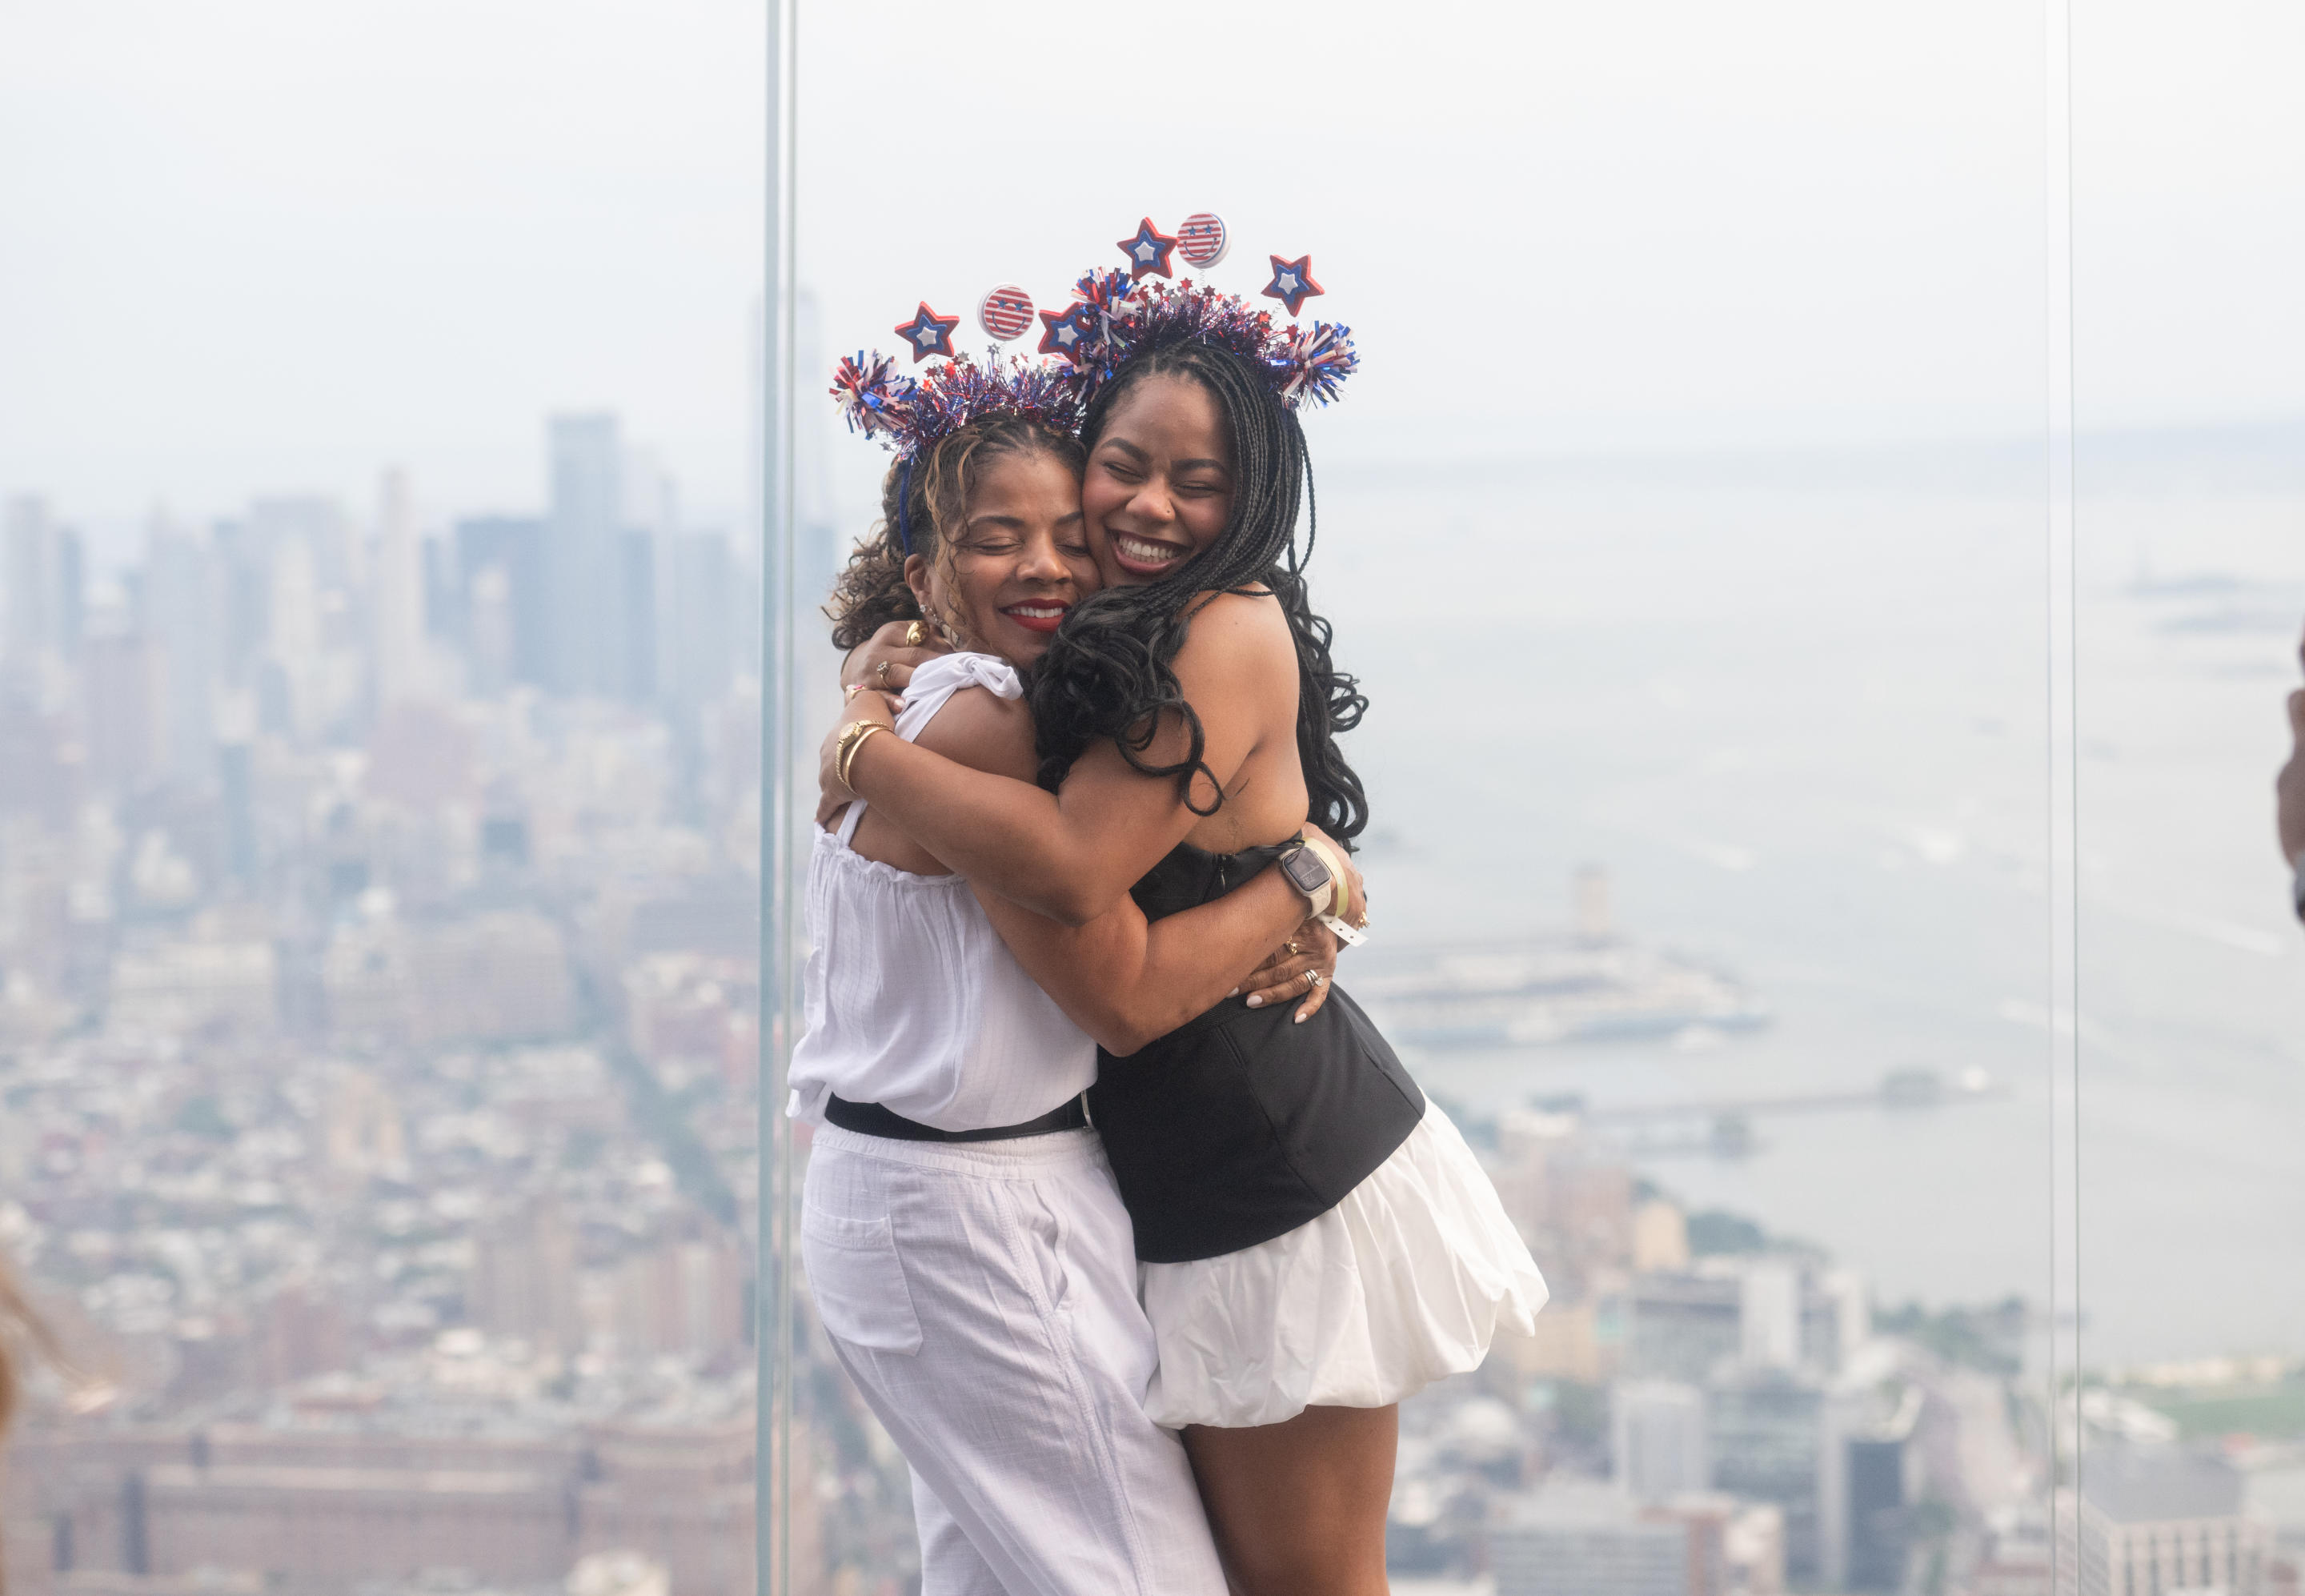 Women embracing and wearing Fourth of July headbands on the observation deck of the Edge.